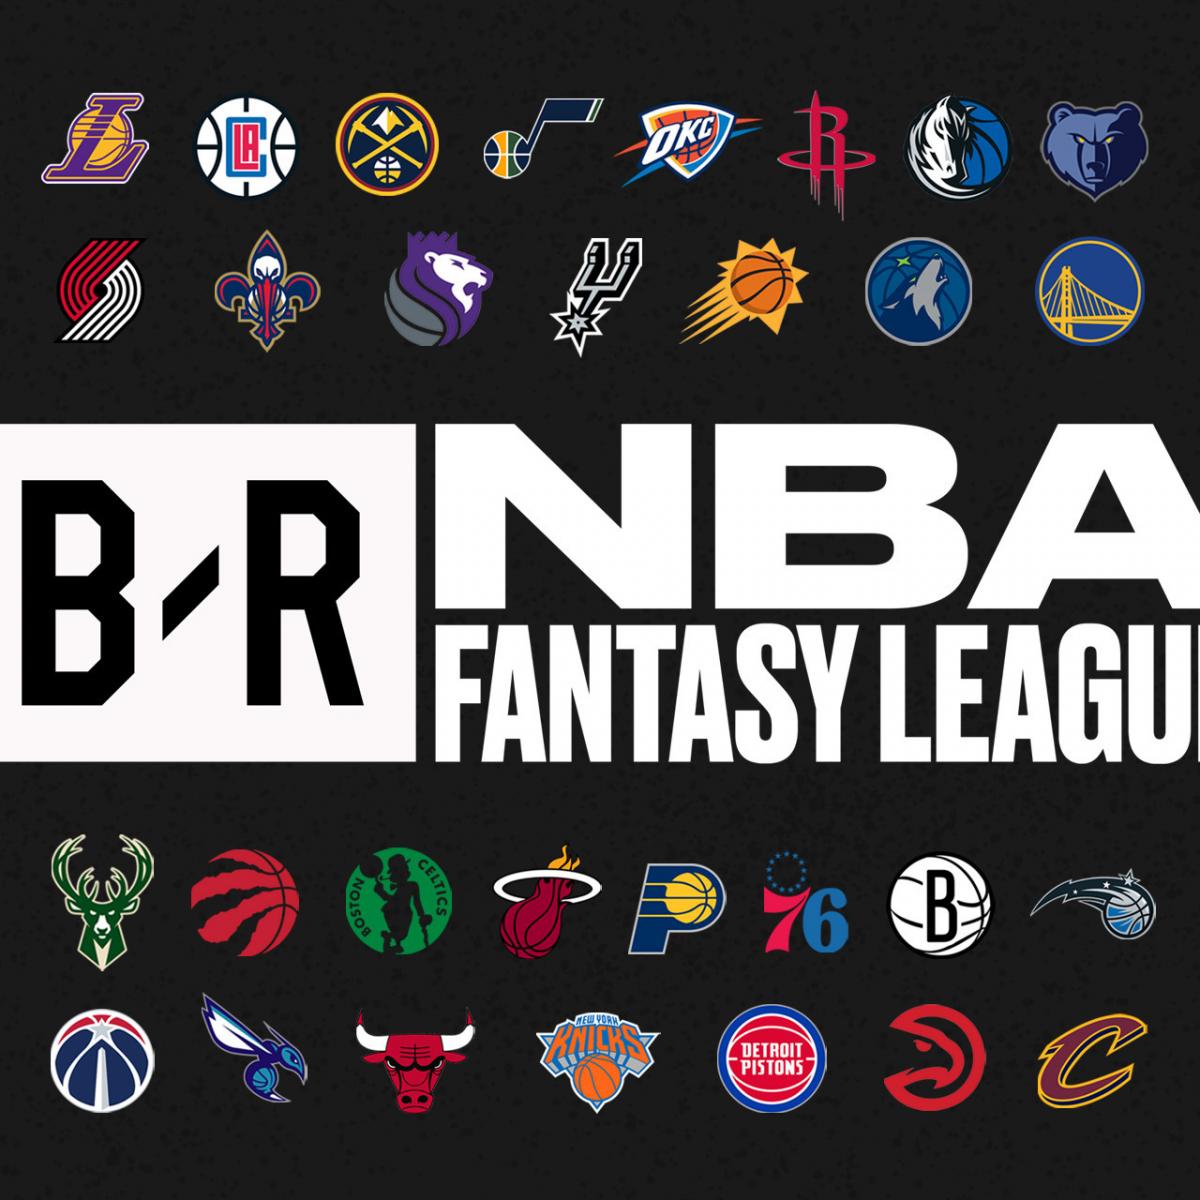 2020 B R Nba Fantasy Gm League Full Participants List Rules And More Bleacher Report Latest News Videos And Highlights